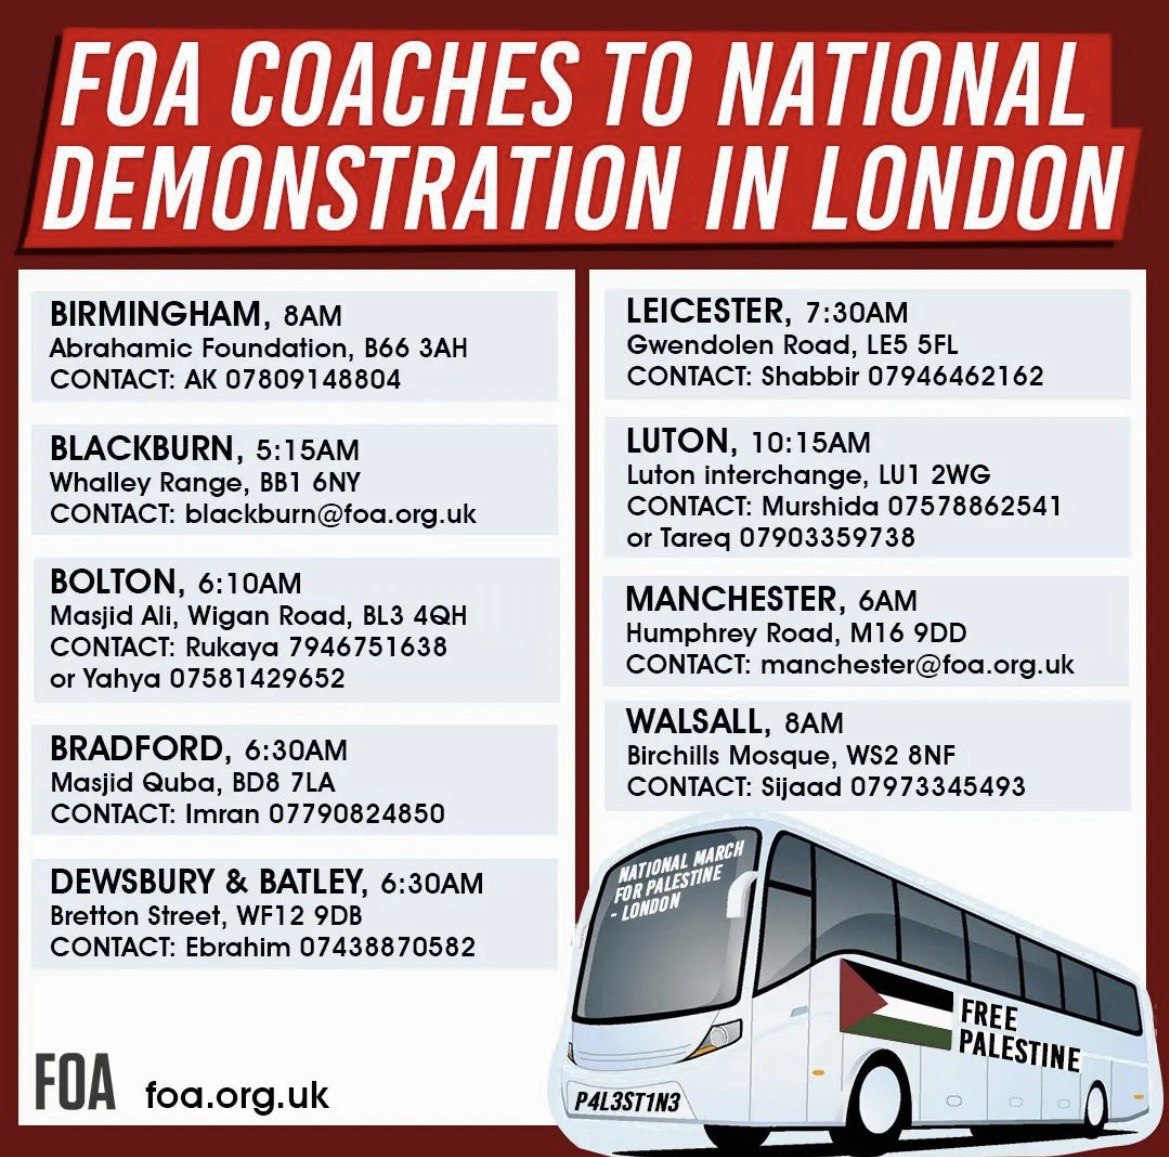 🚨NATIONAL DEMONSTRATION🚨
       
📅 Date: Saturday 27th April  
⏰ Time: 12 noon! 
🌐Assemble @ Parliament Square to Hyde Park

For coaches going to the National Demonstration in London on Saturday 27th April, see the second page. If you live in any of these cities and want to…